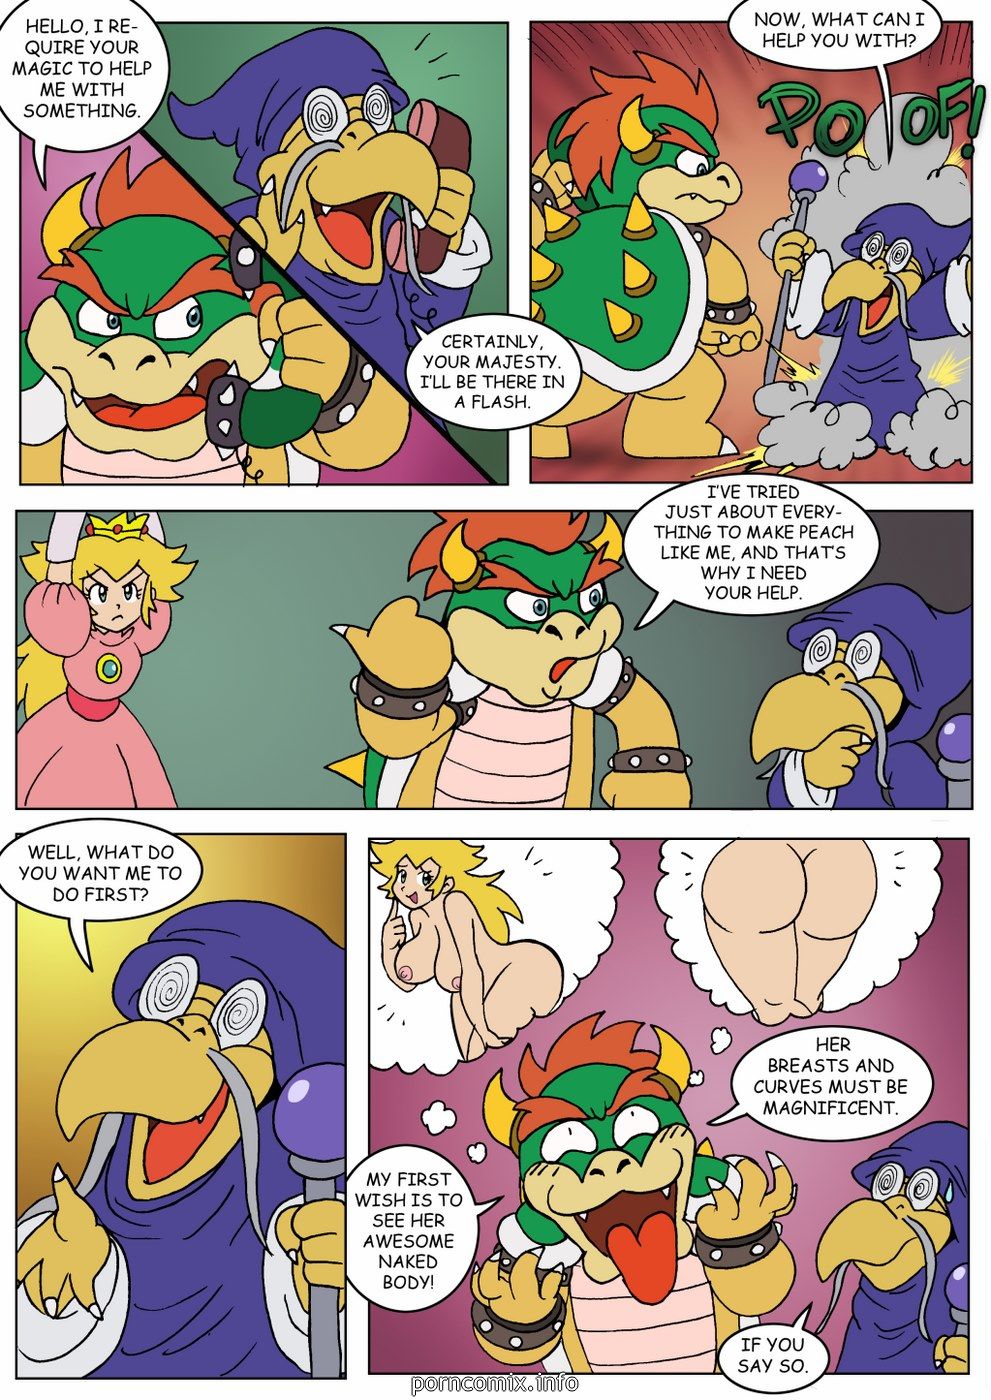 Peach's Tail of Escape (Super Mario Brothers) page 3